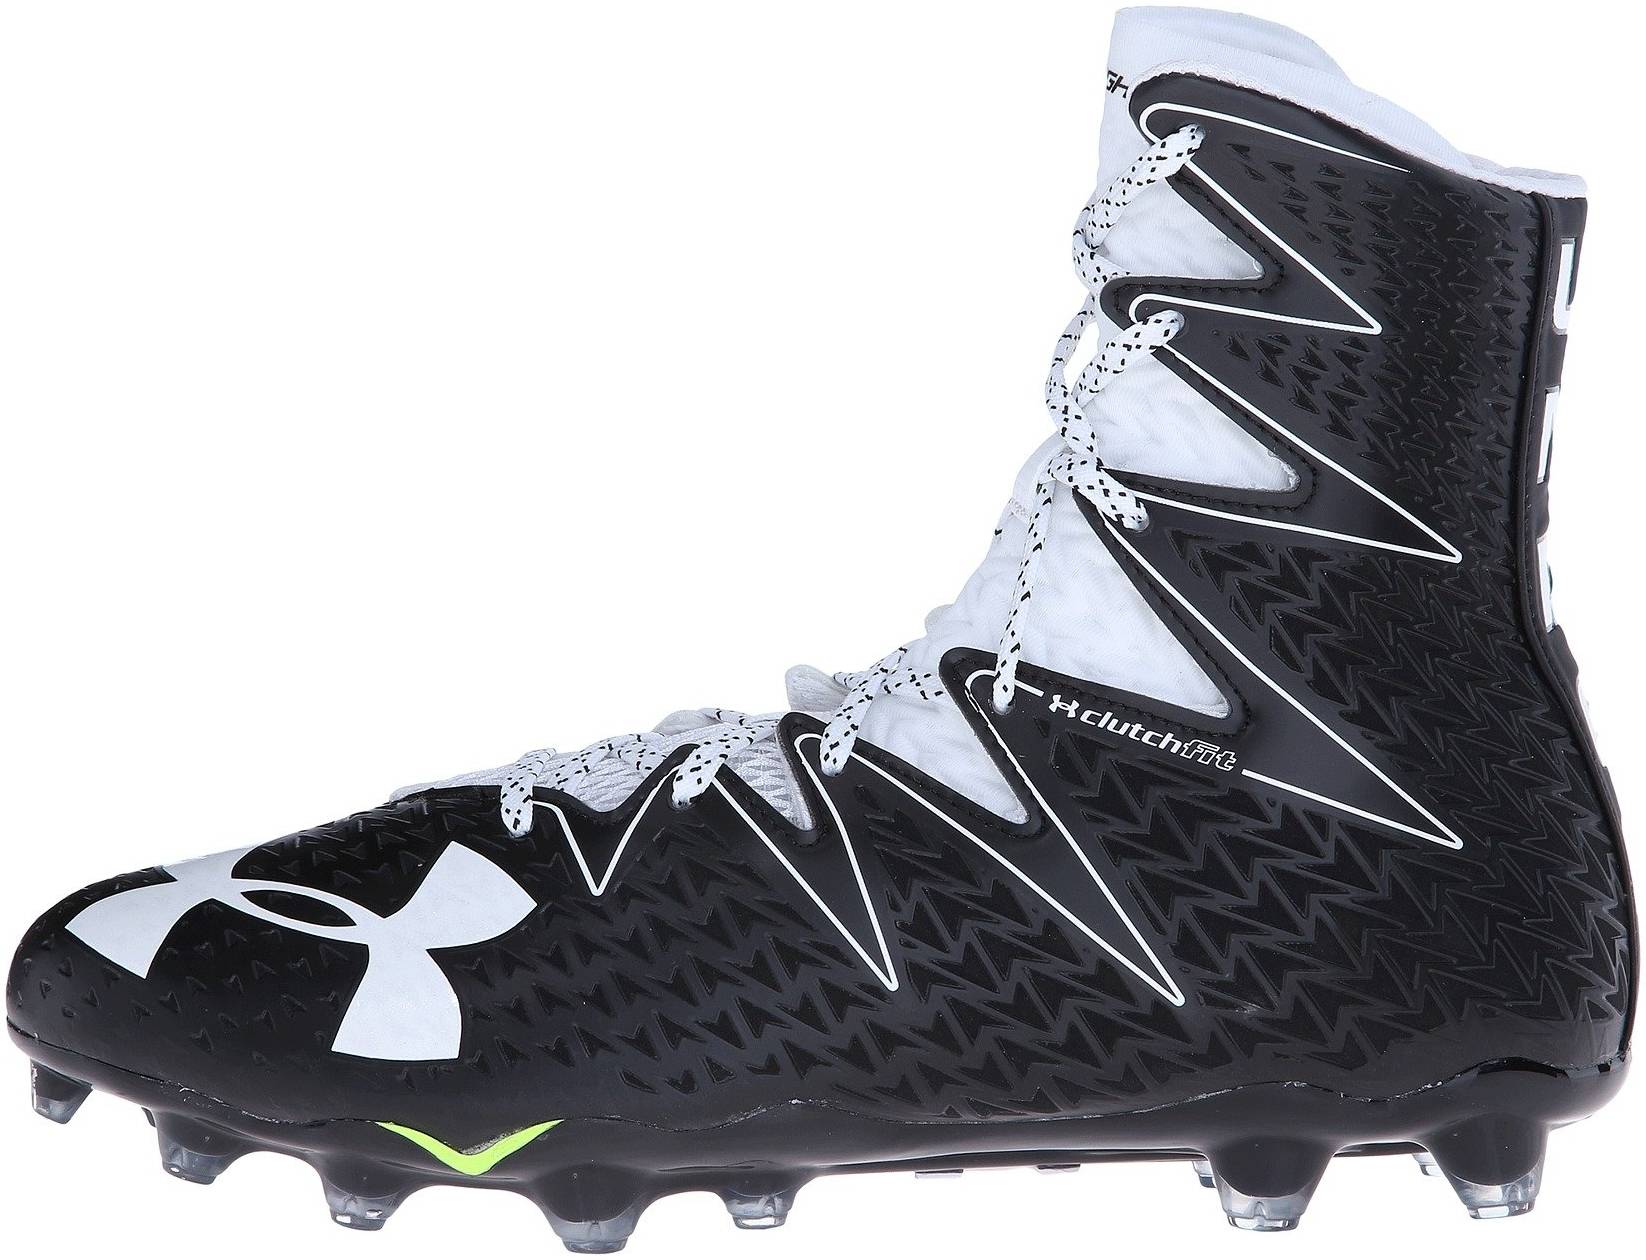 NEW Mens Under Armour Saber Mid D Football Cleats Black Silver Size 8 M 